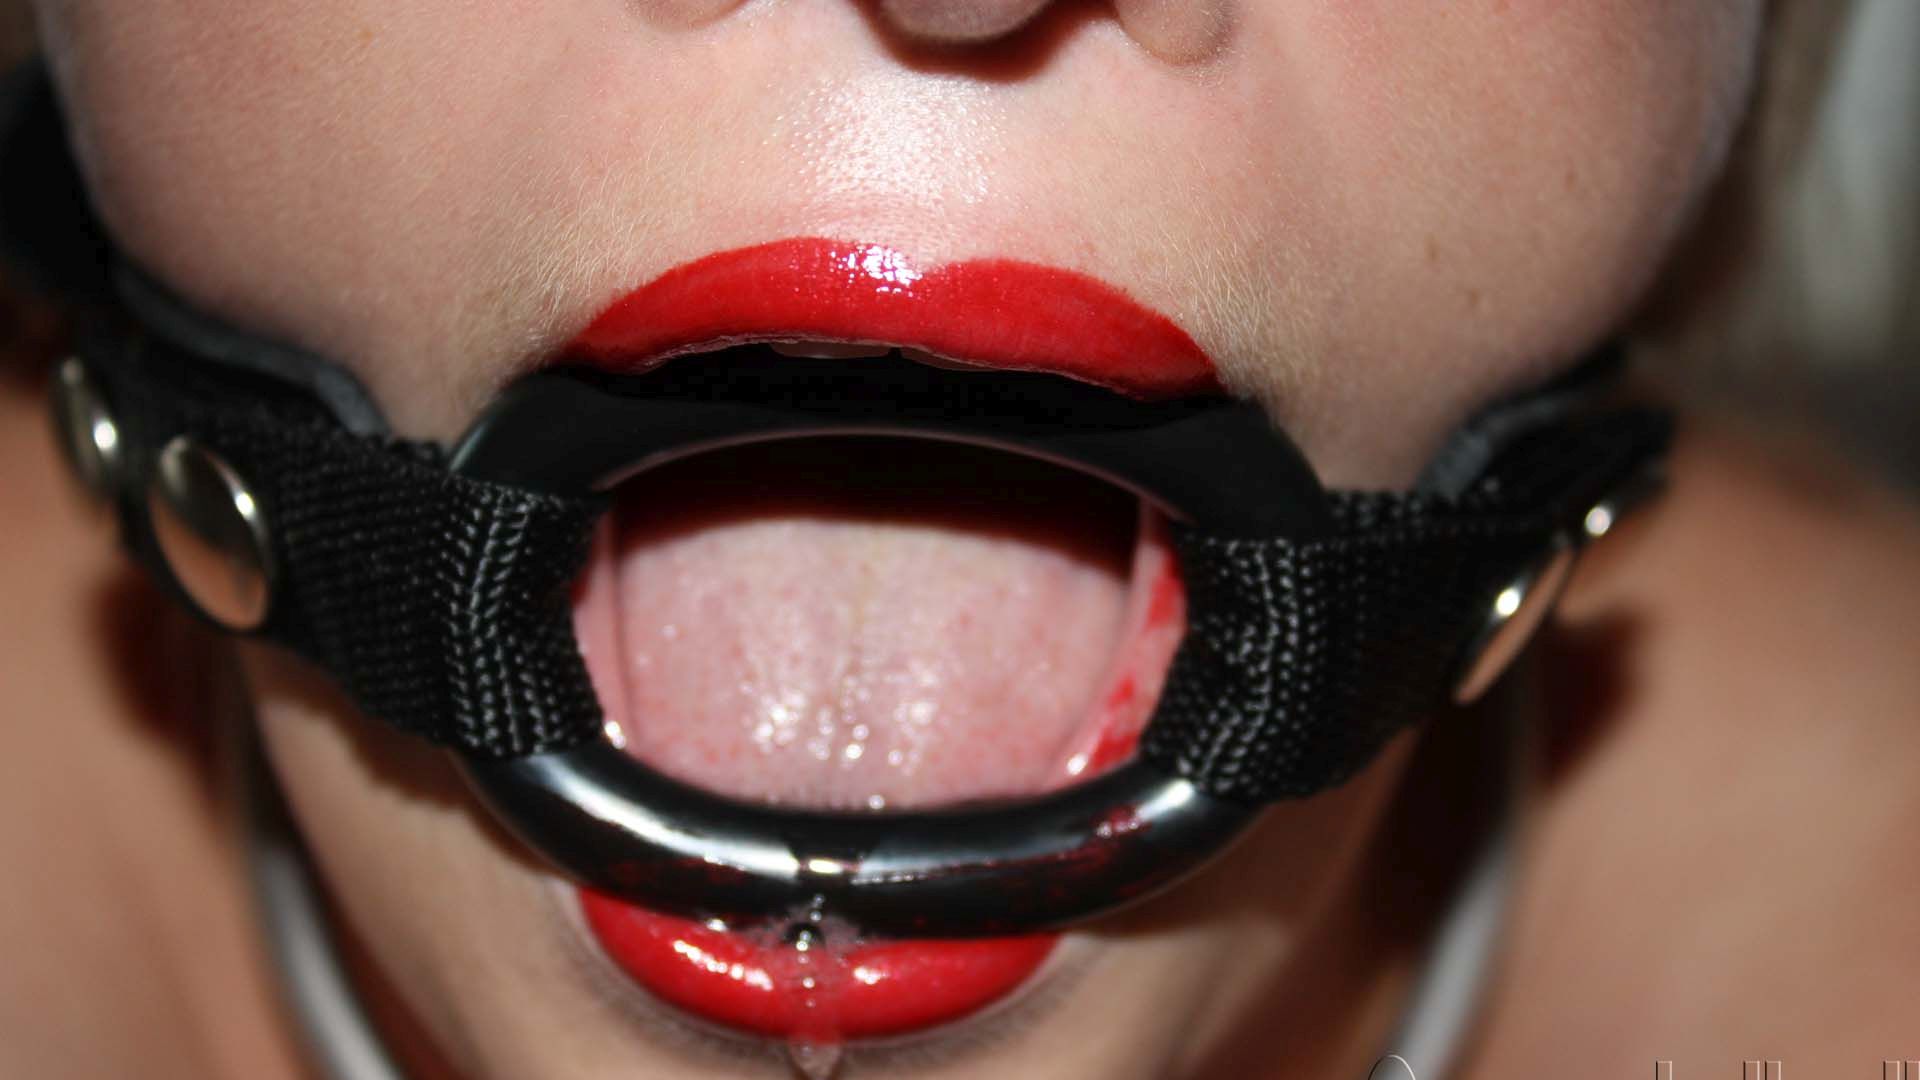 Dribbling with a gag in bondage